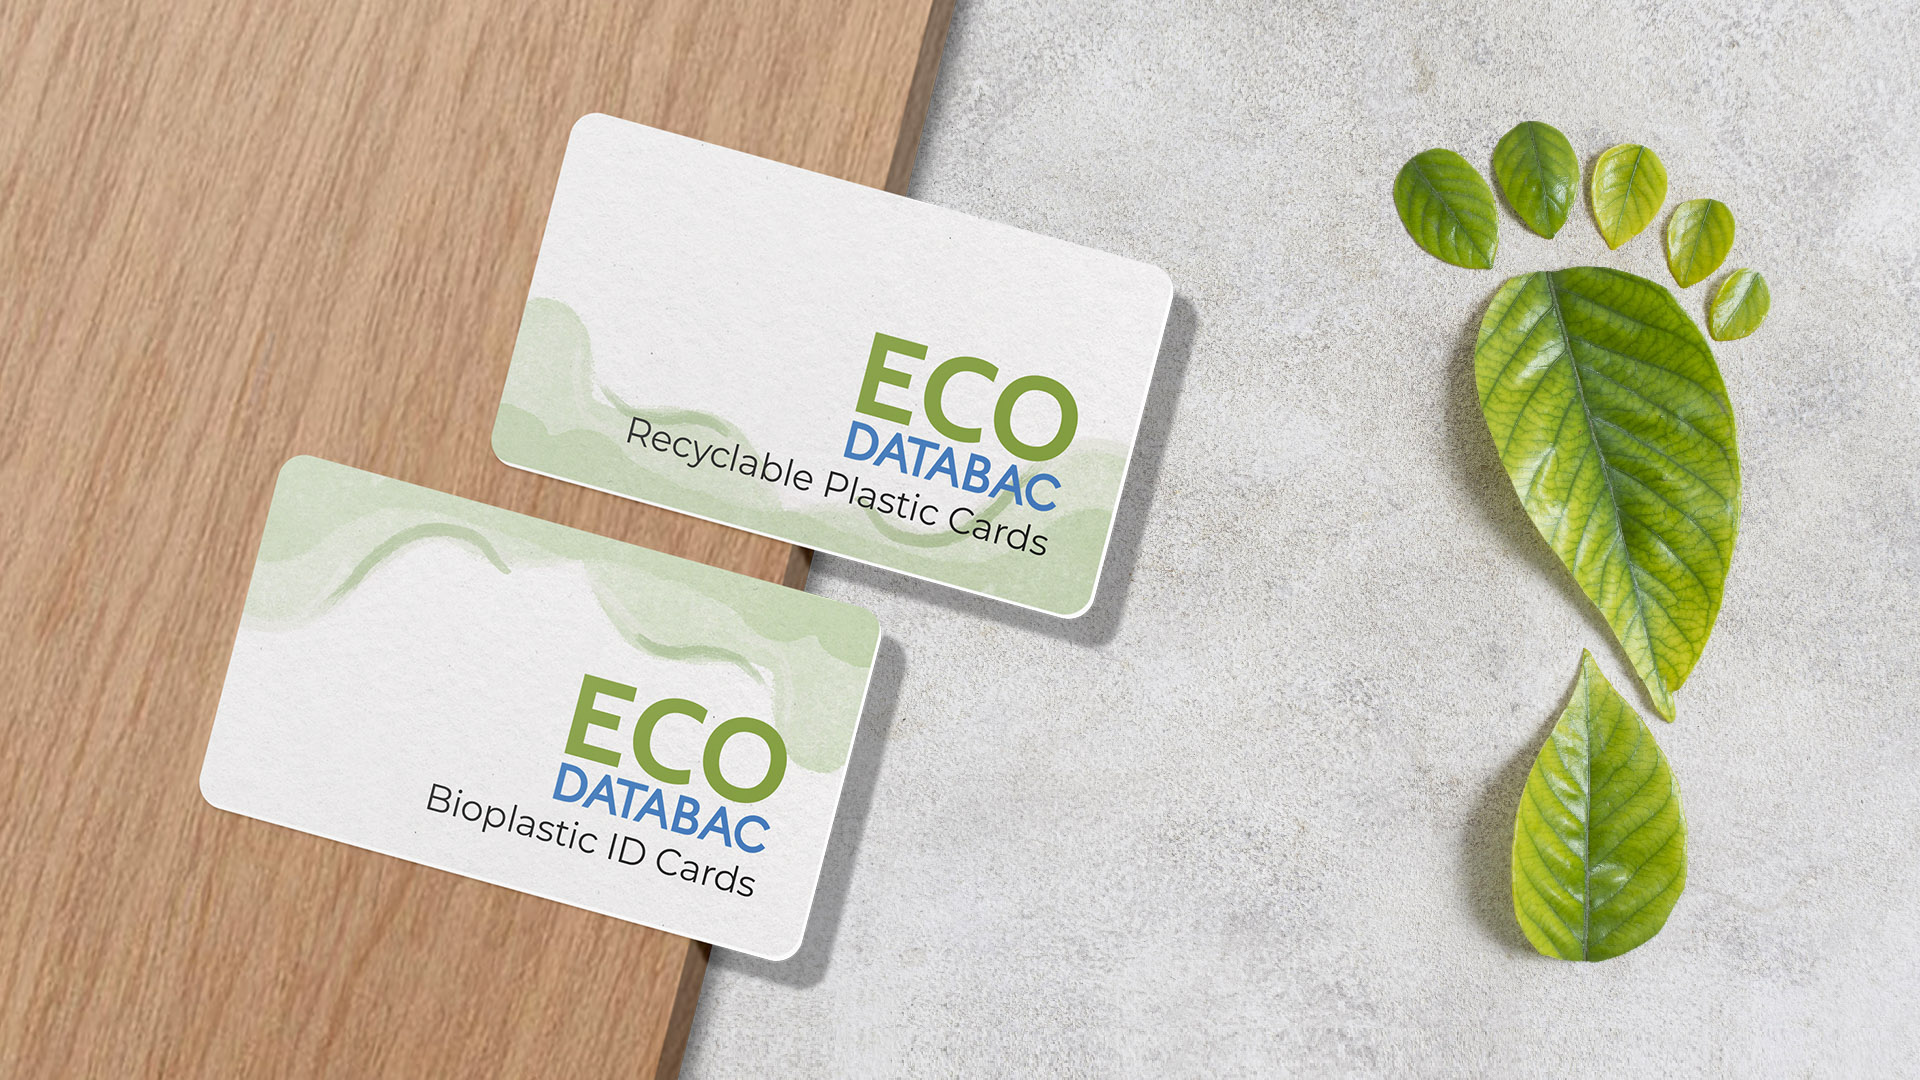 5 ways to make your ID cards more sustainable - Databac